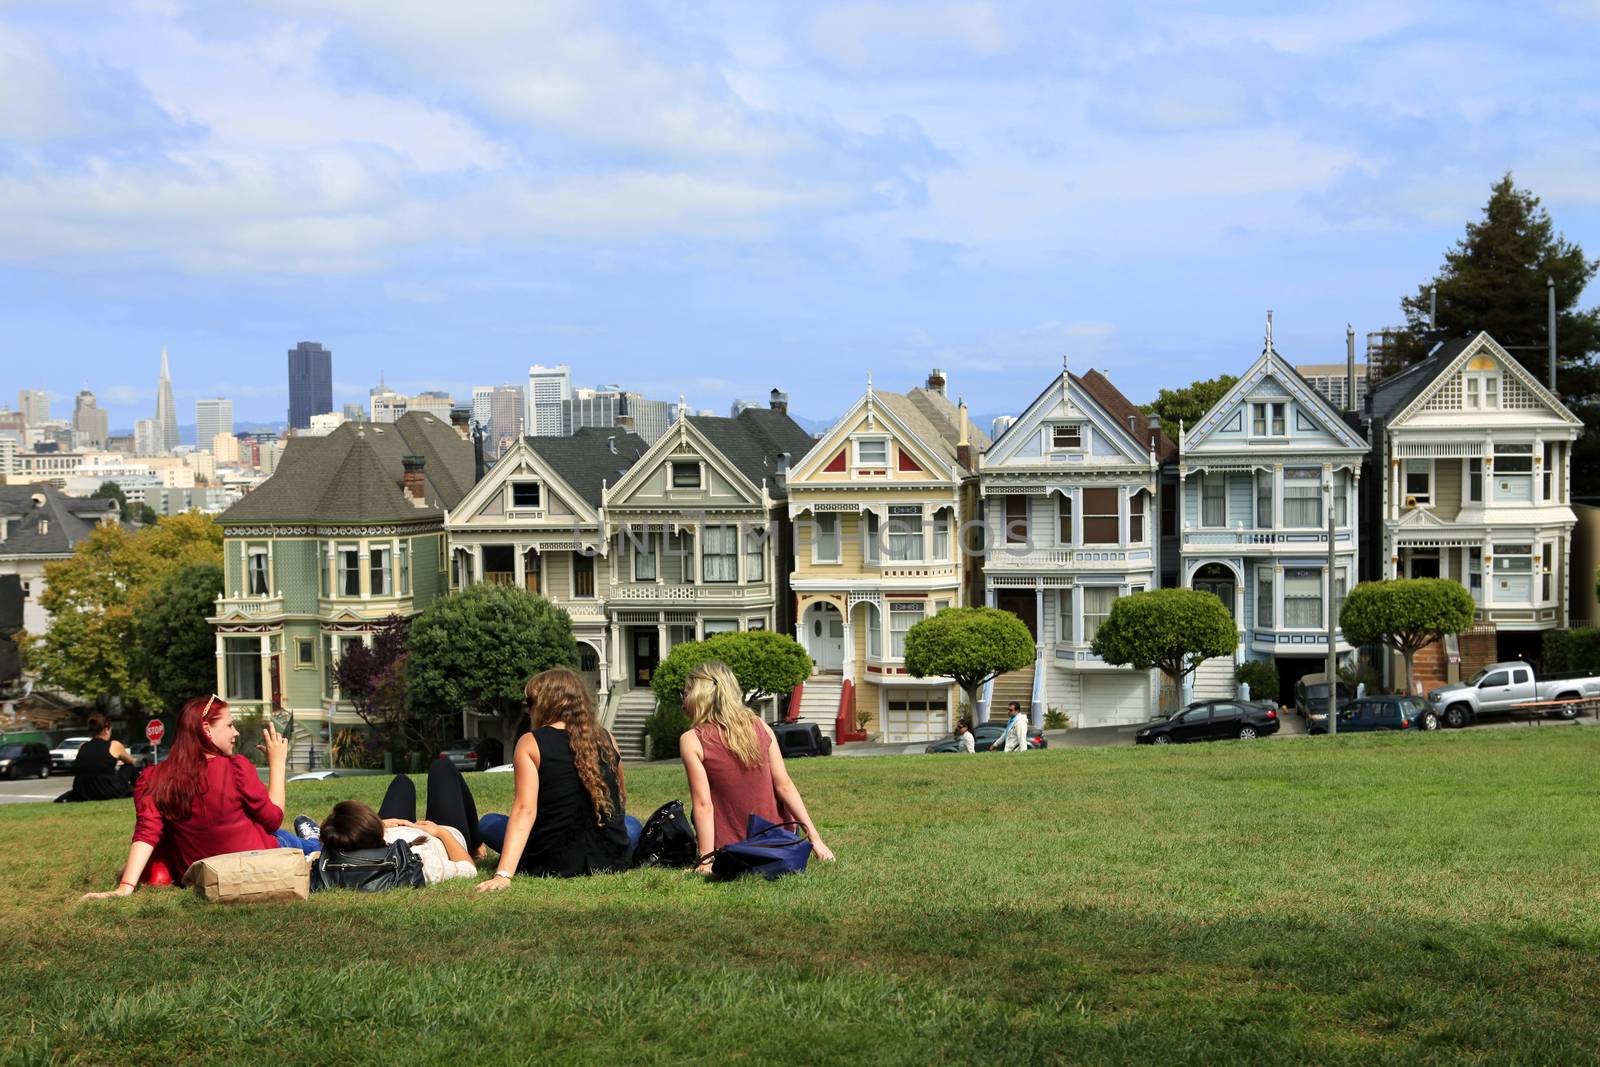 Alamo Square by friday